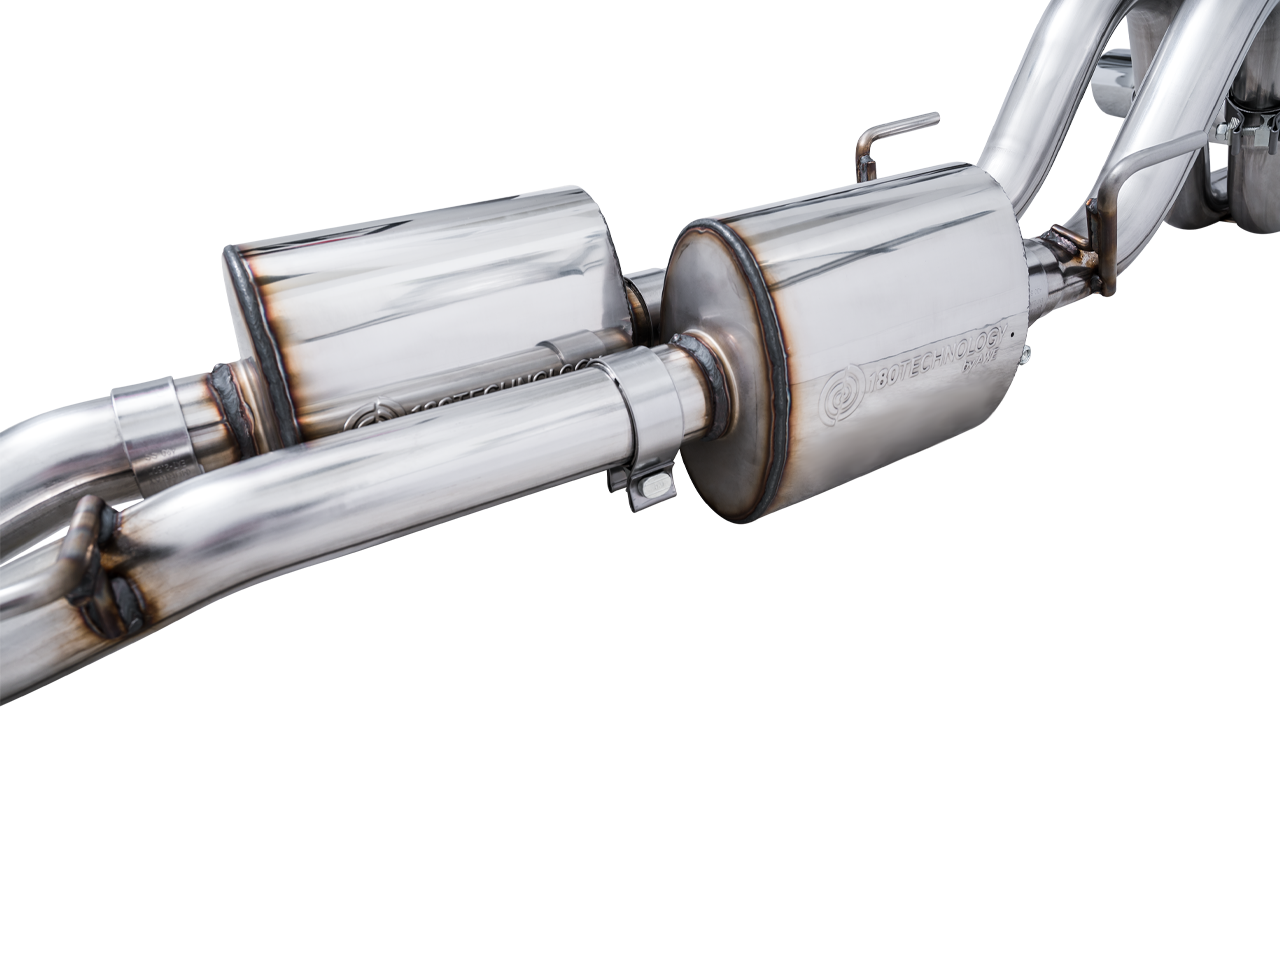 AWE 0FG Exhaust with BashGuard for 3rd Gen Tacoma - Dual Chrome Silver Tips (3015-32826)